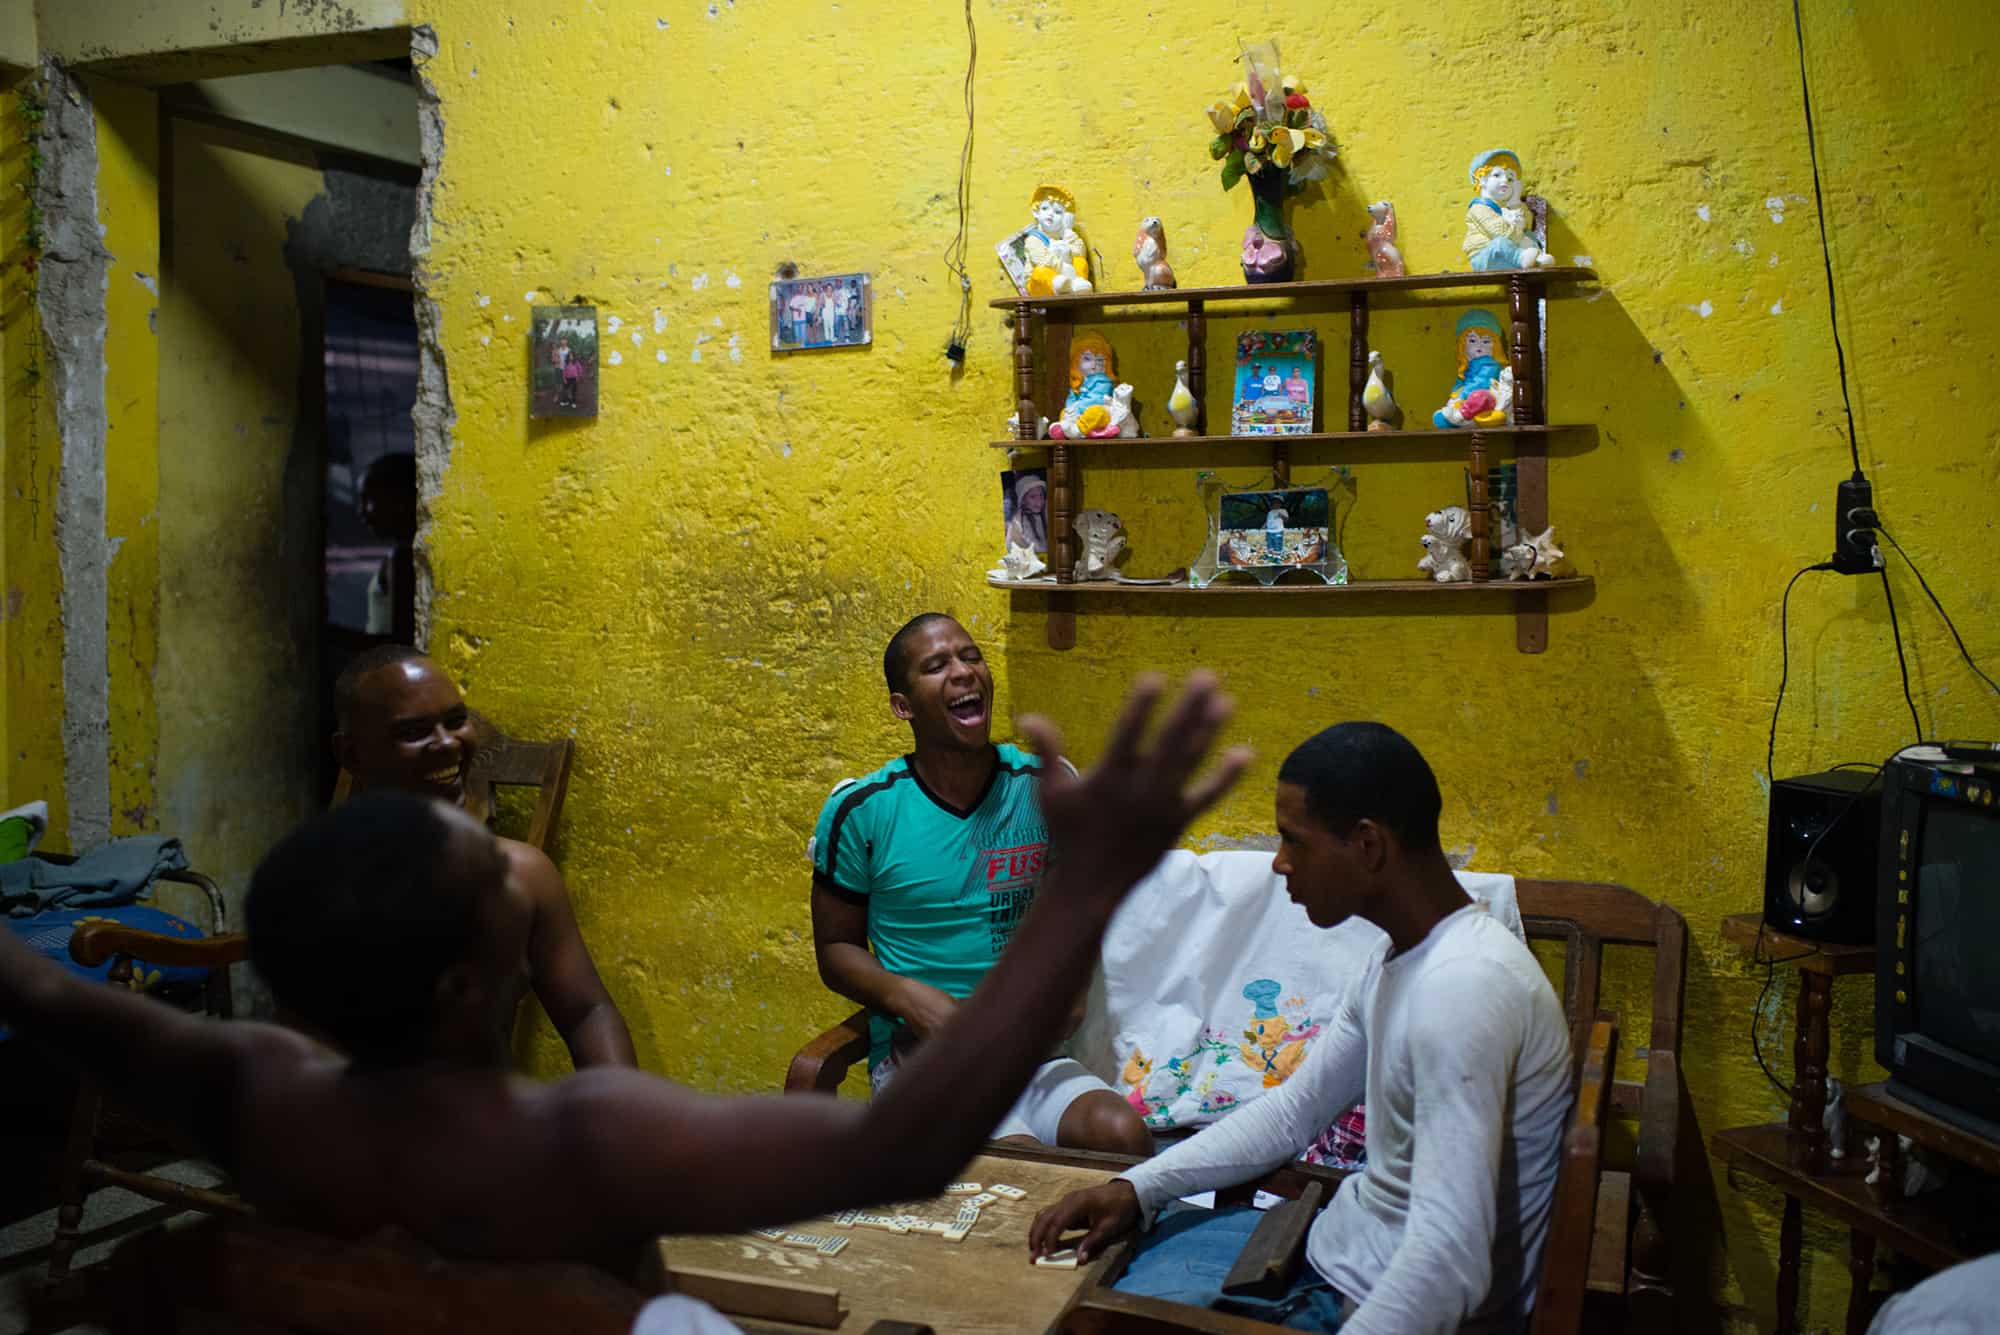 In the poor neighborhood of Juruquey in Camaguey, Cuba, shown on Feb. 3, 2015, Yasmany Garcia, 26, in green, screams with excitement at the end of a round of dominos with his friends at his home. Camaguey is Cuba's third largest city with more than 321,000 residents.